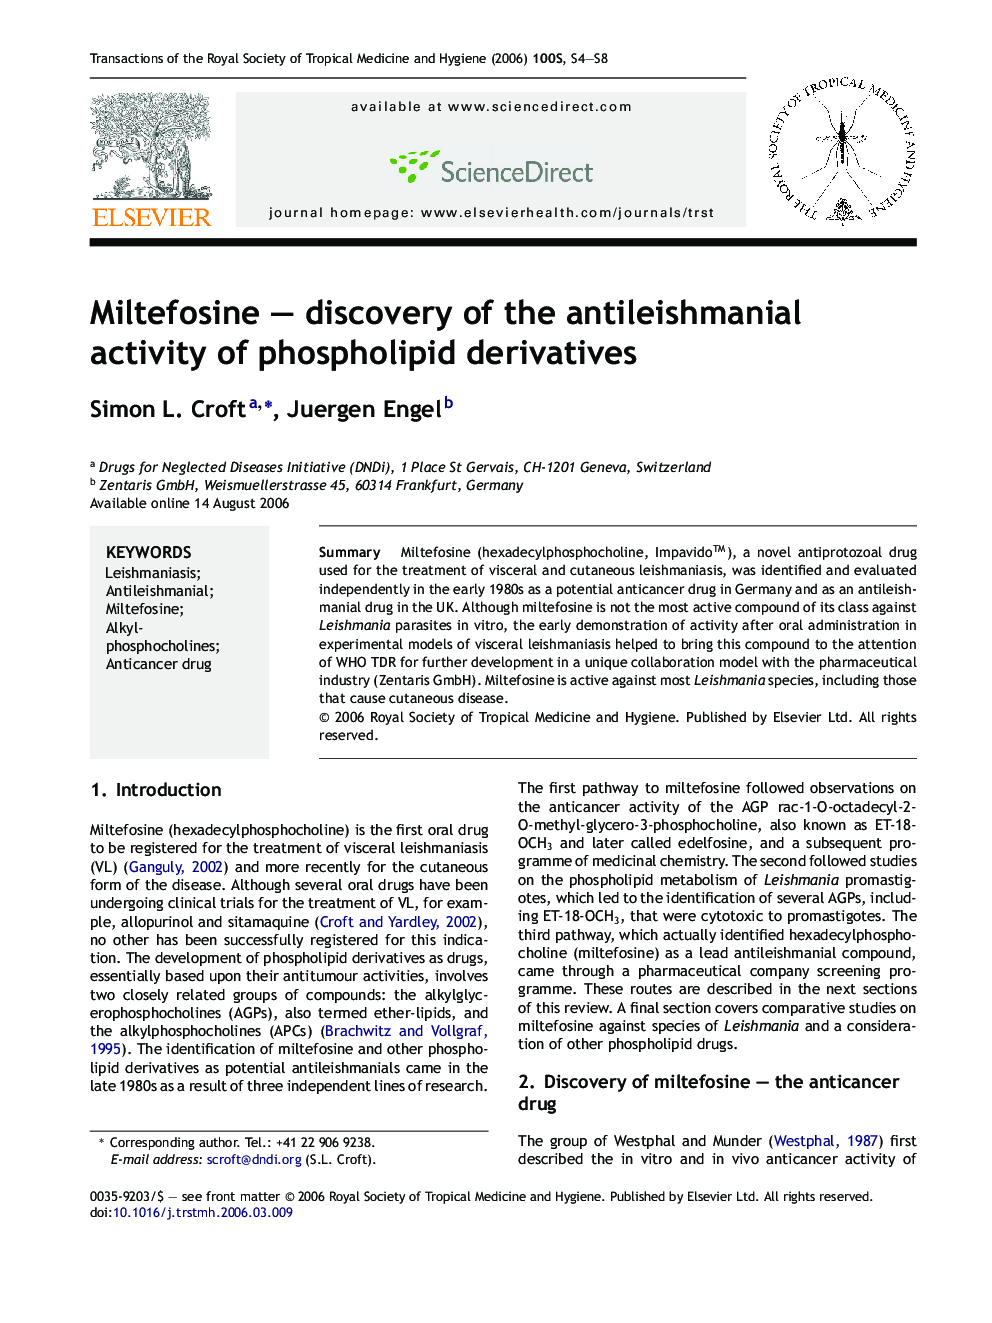 Miltefosine – discovery of the antileishmanial activity of phospholipid derivatives